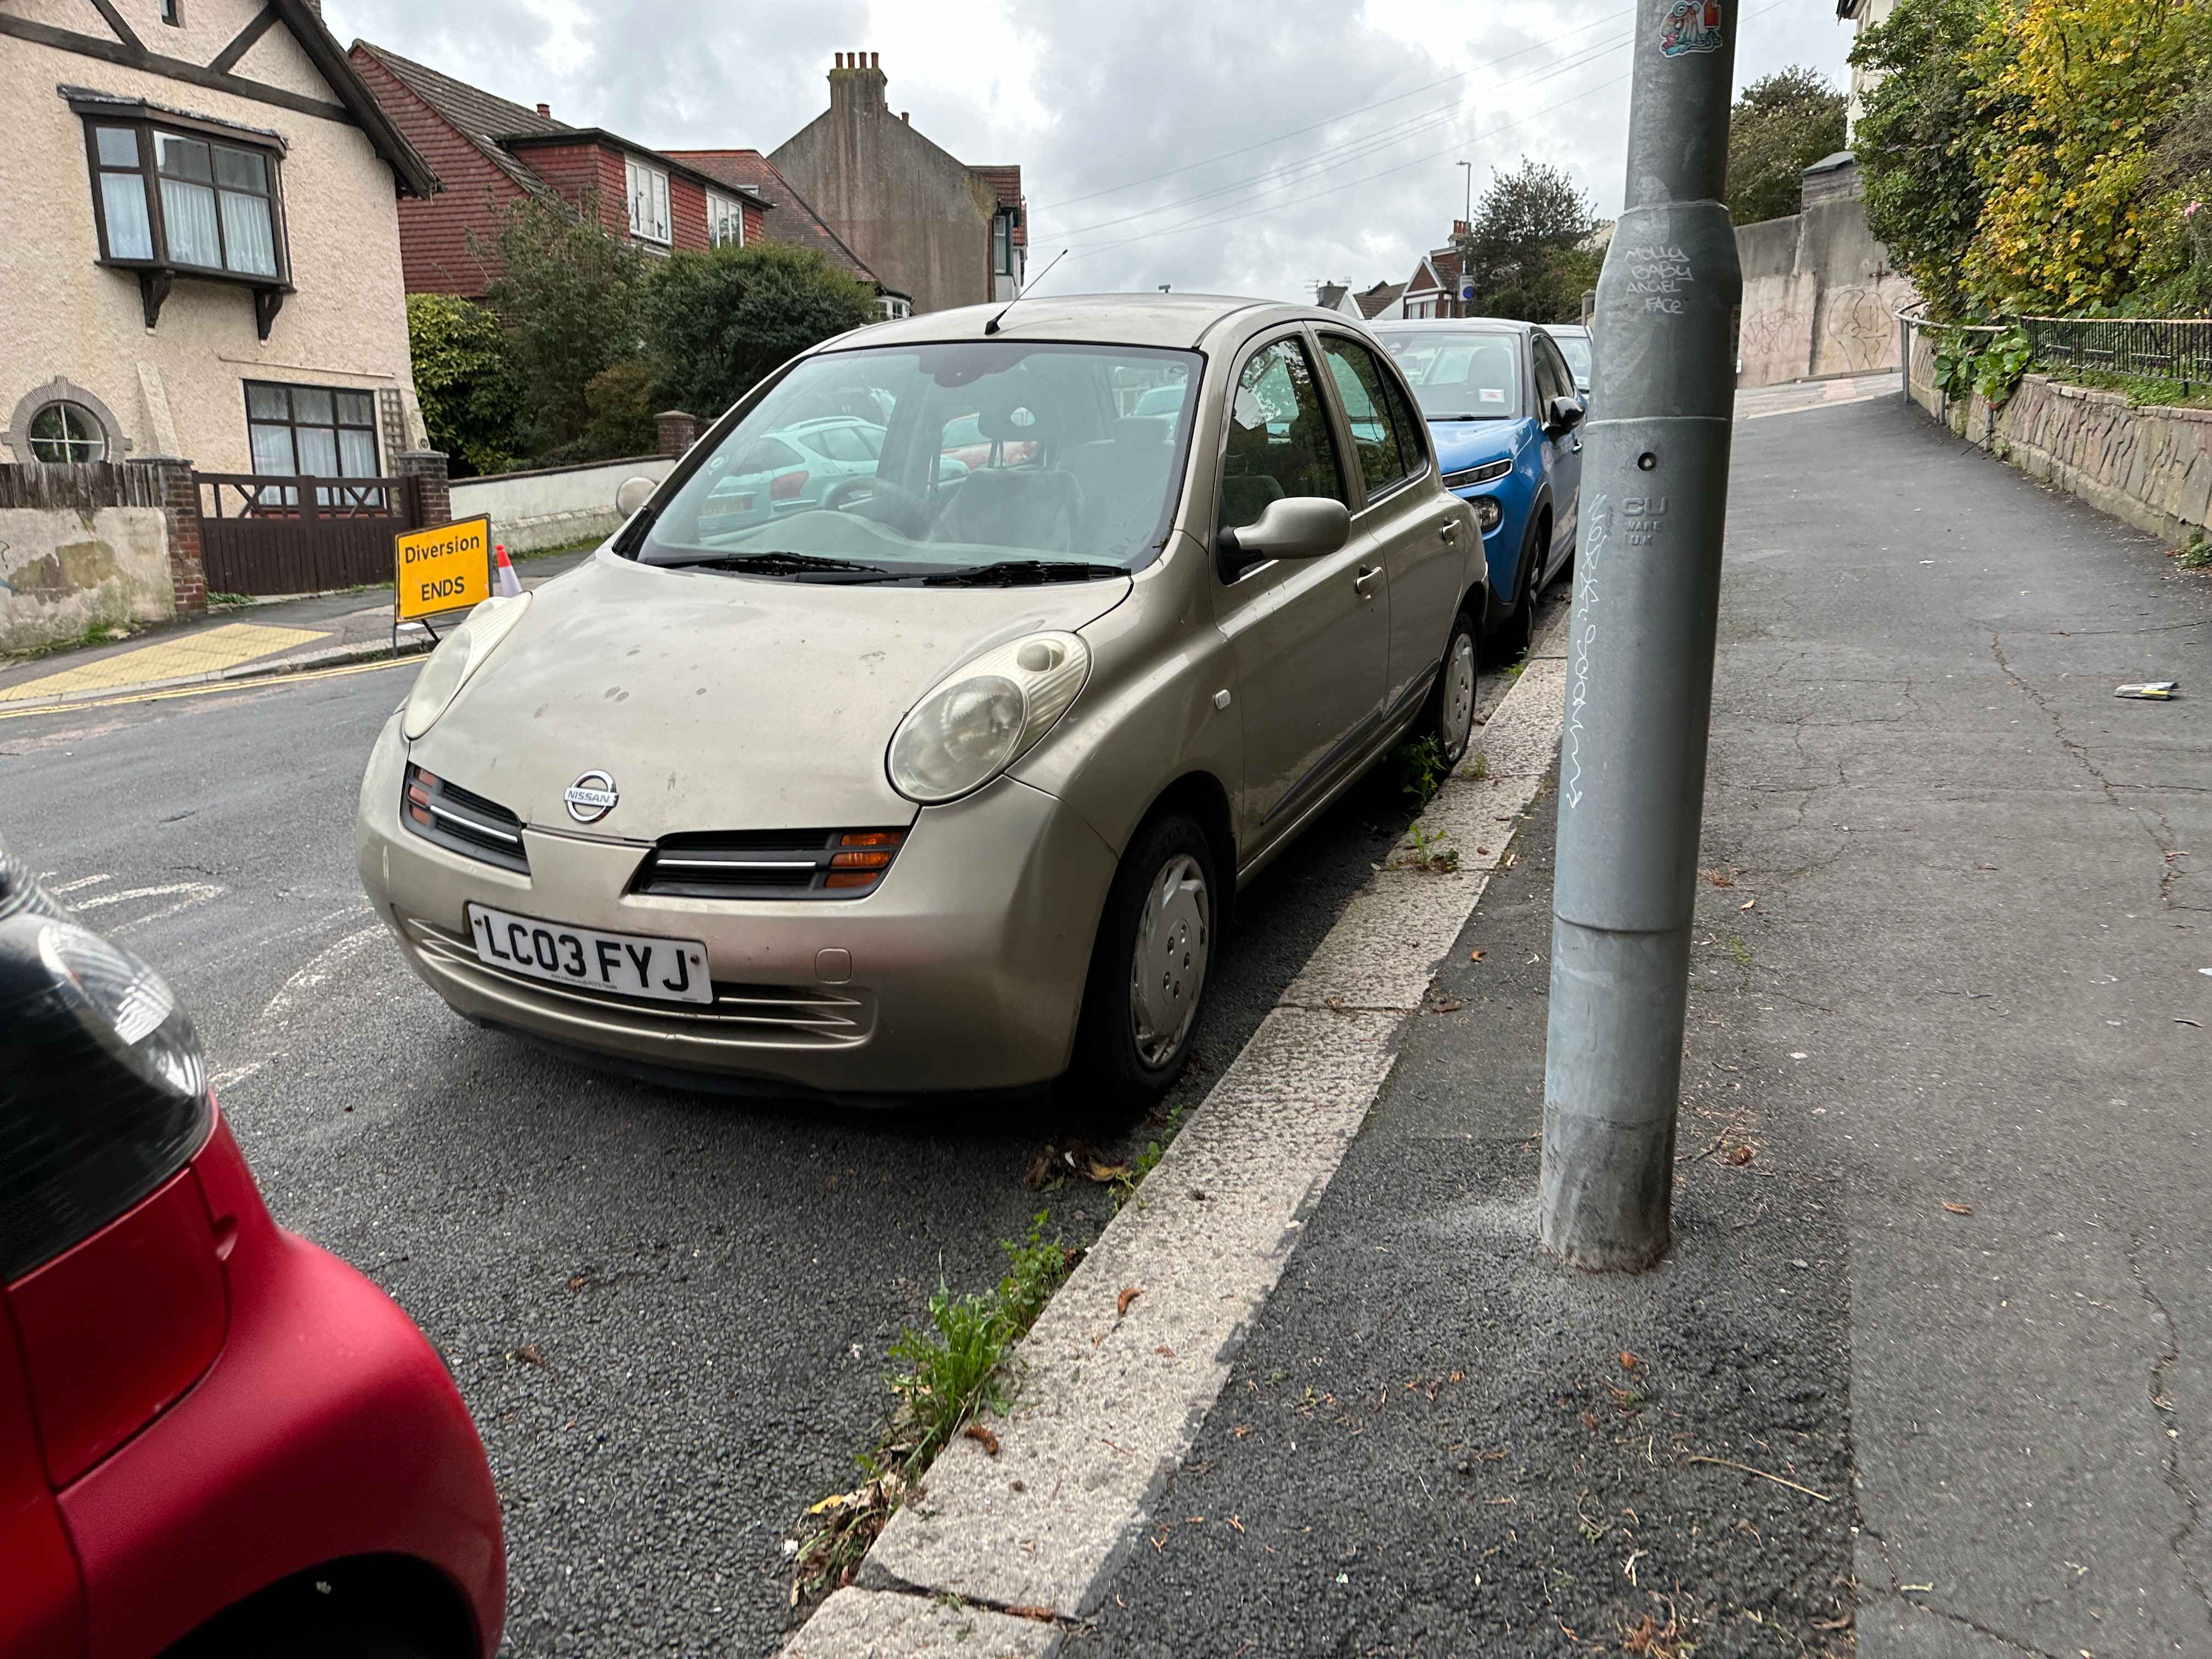 Photograph of LC03 FYJ - a Gold Nissan Micra parked in Hollingdean by a non-resident, and potentially abandoned. The seventh of seventeen photographs supplied by the residents of Hollingdean.